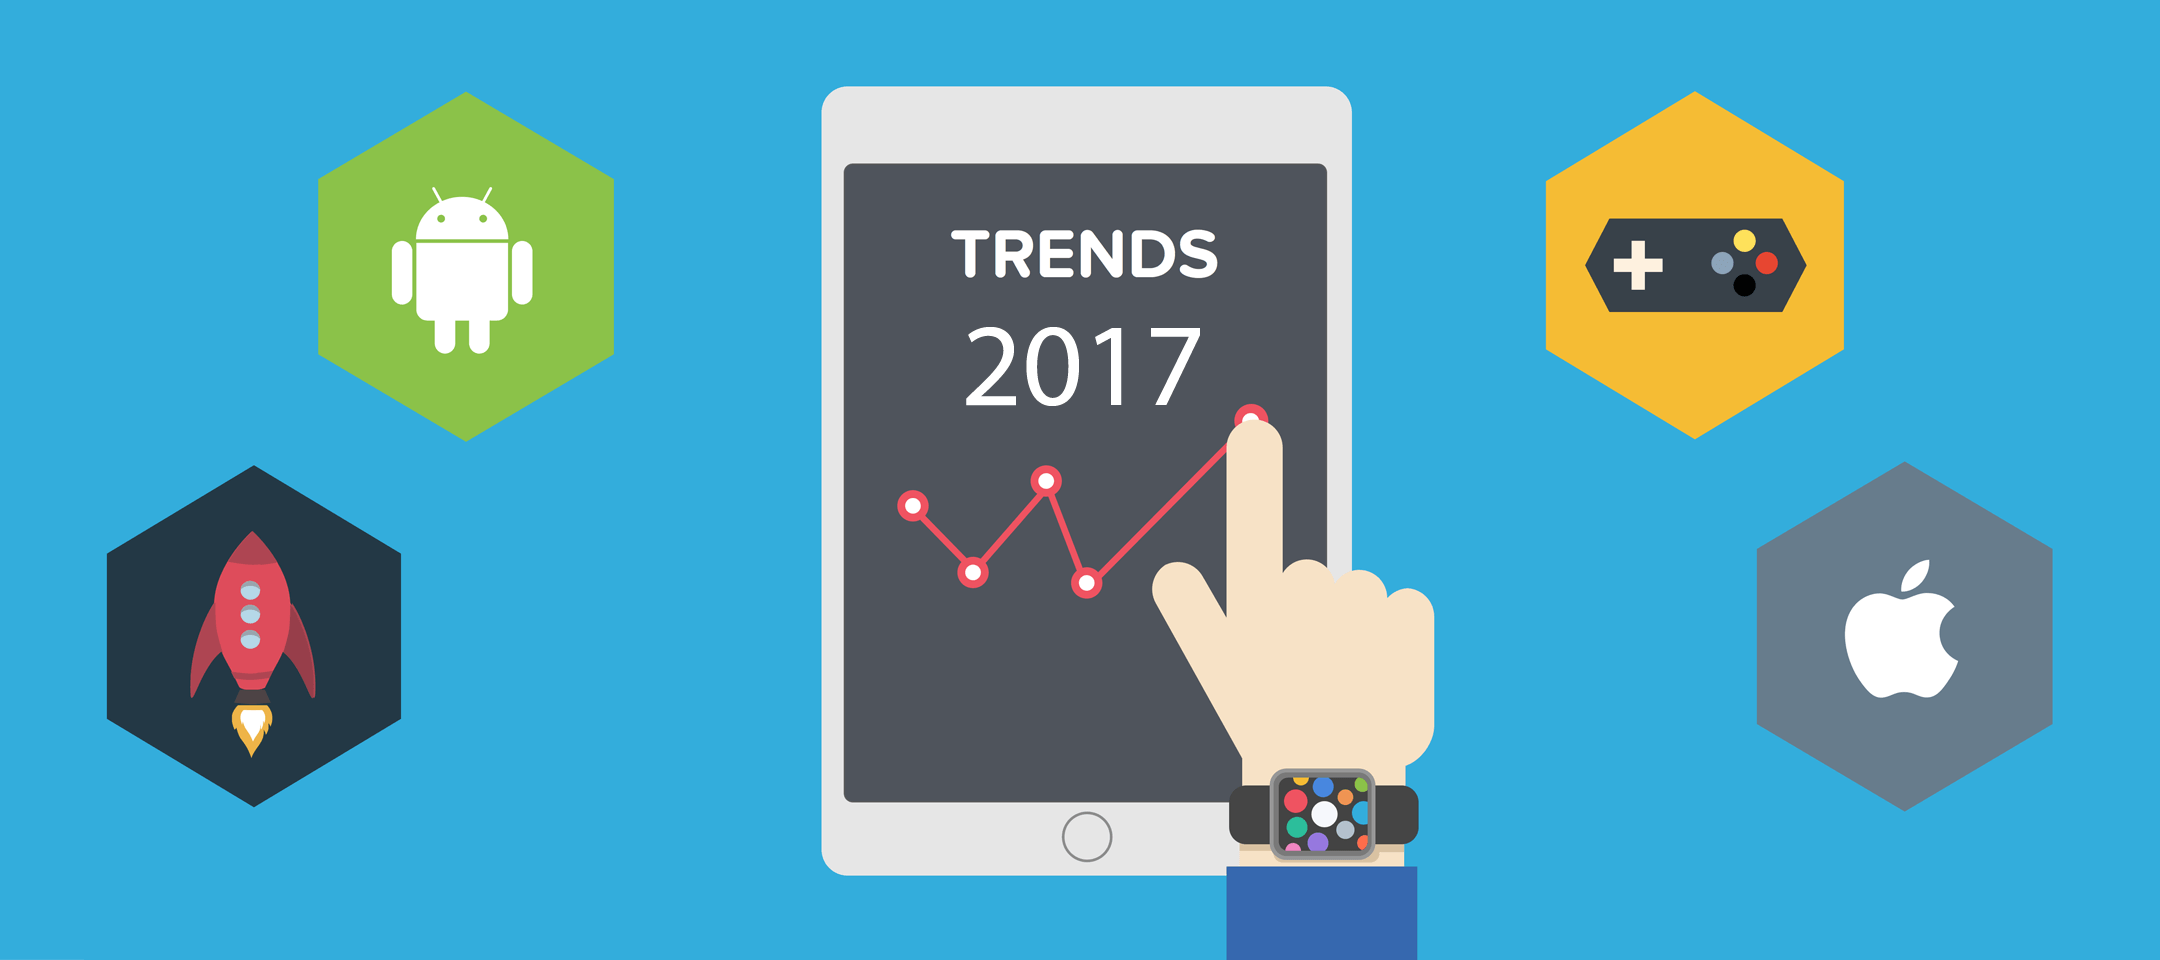 5 Top Mobile App Design Trends To Watch In 2017 « AuroSys Solutions